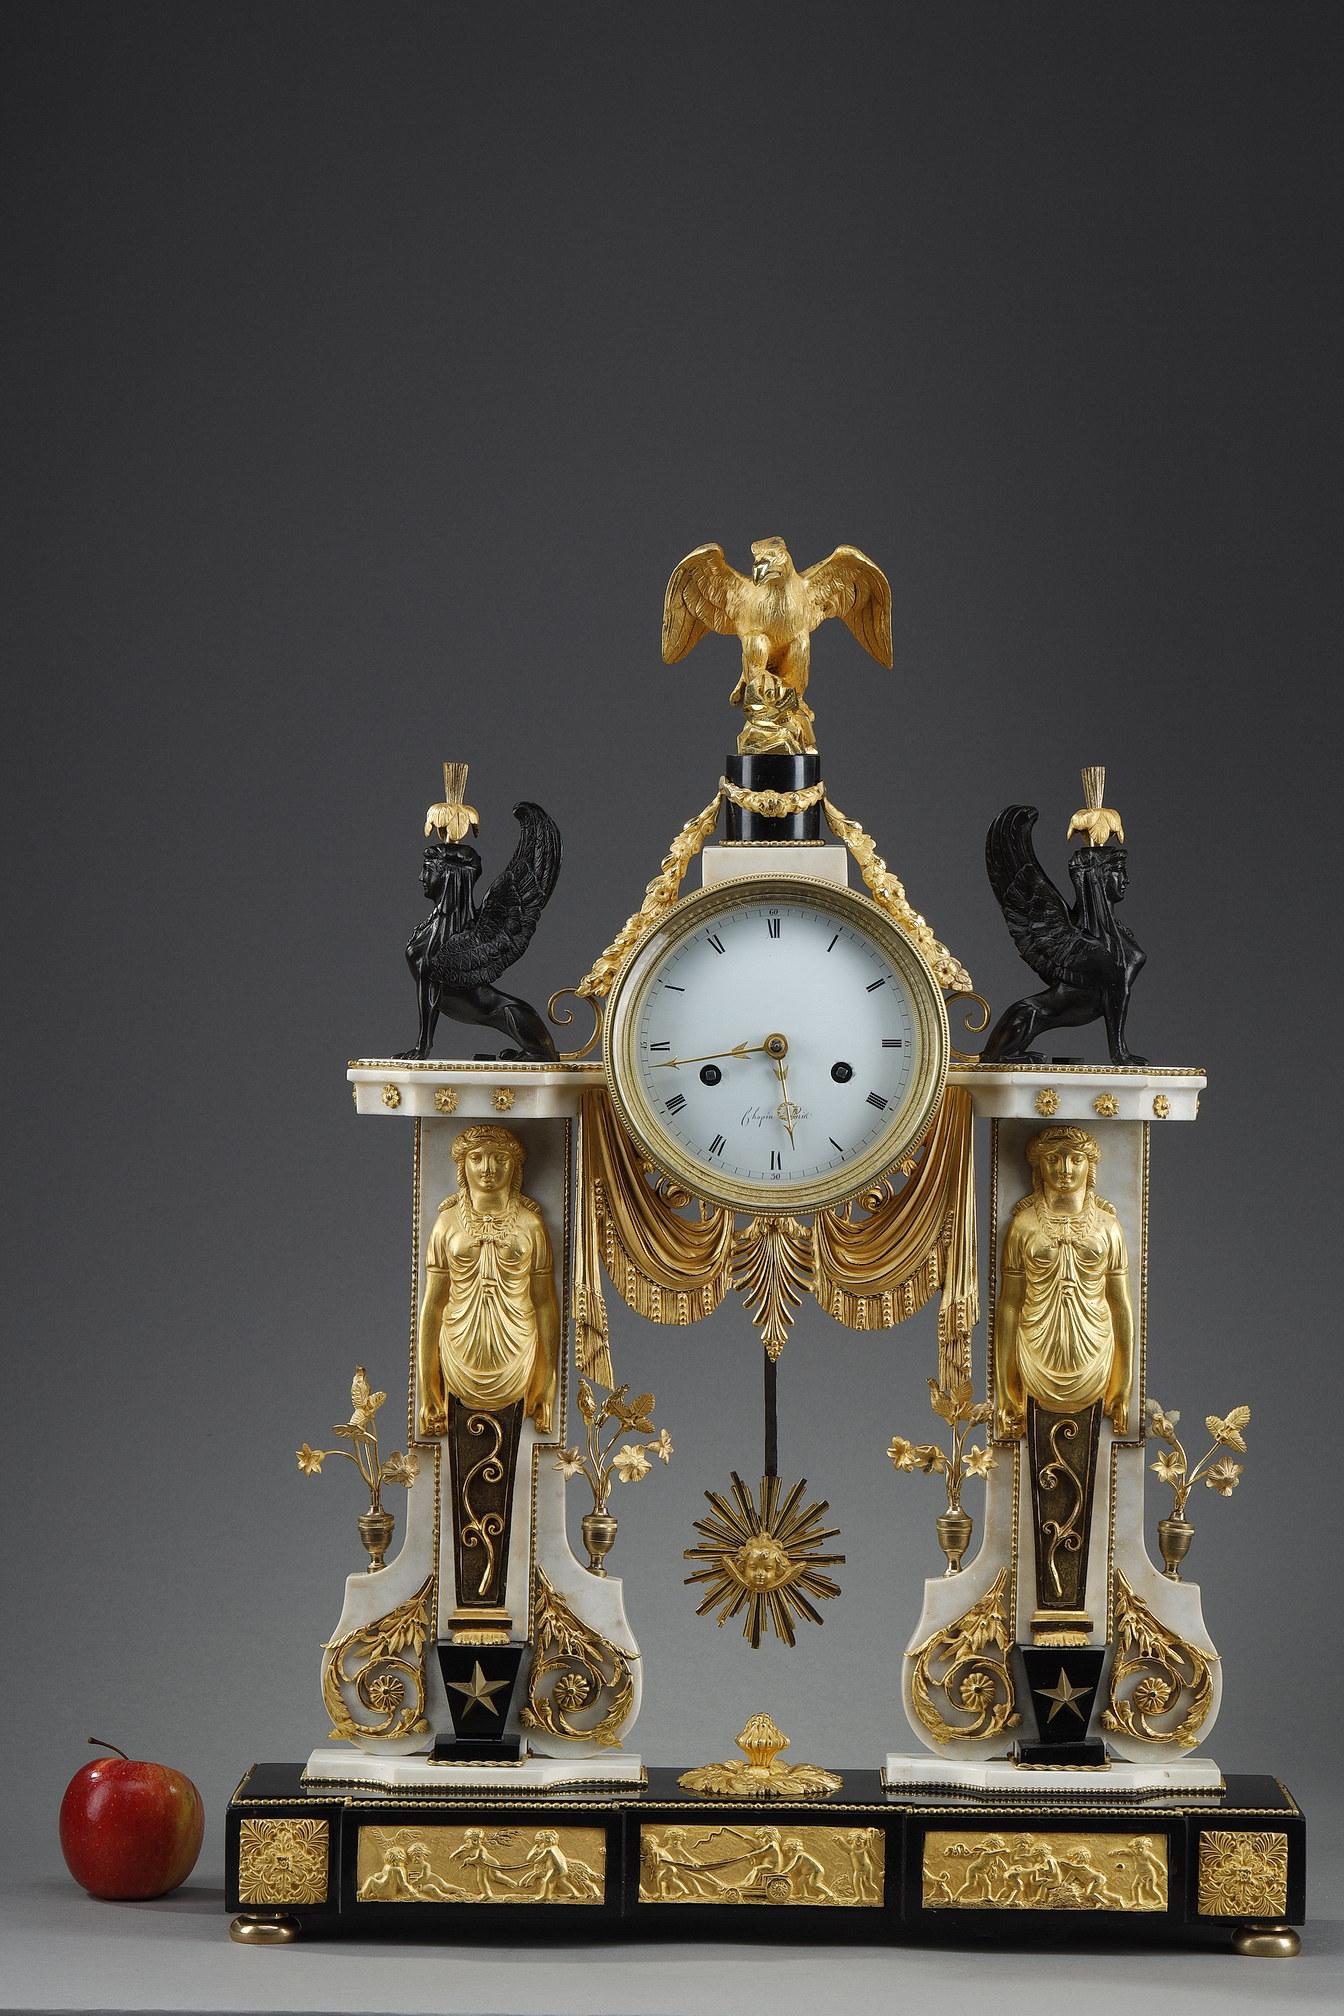 Majestic Directoire period clock in white and black marble adorned with gilt and patinated bronzes. In the 